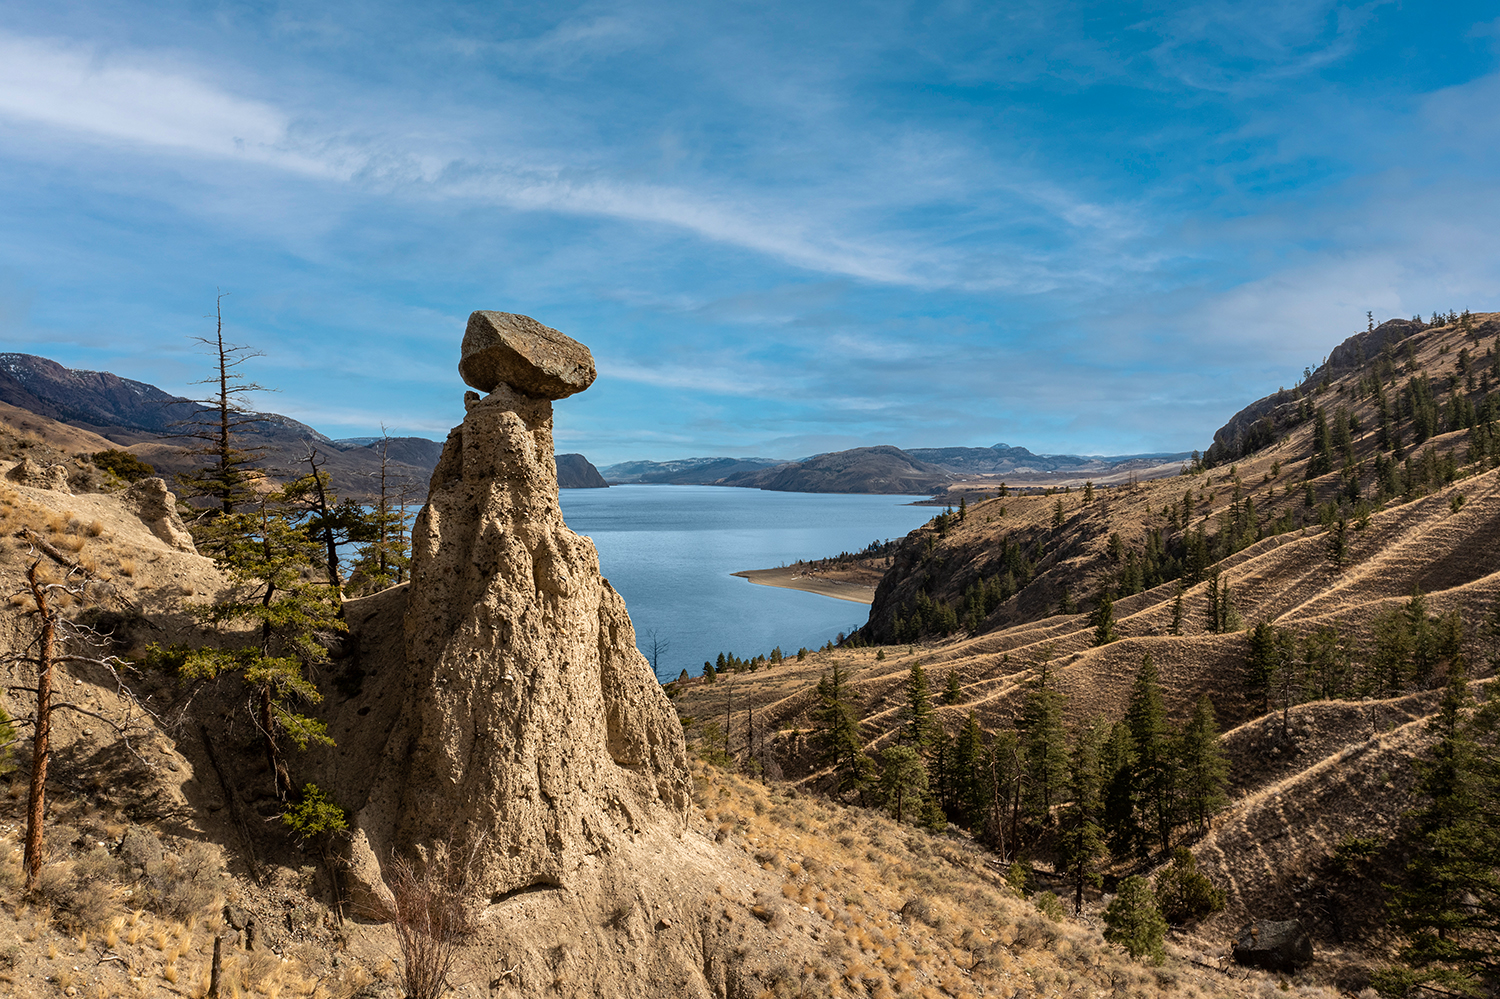 Kamloops Landscape bright blue sky with clouds and rock formation mountains